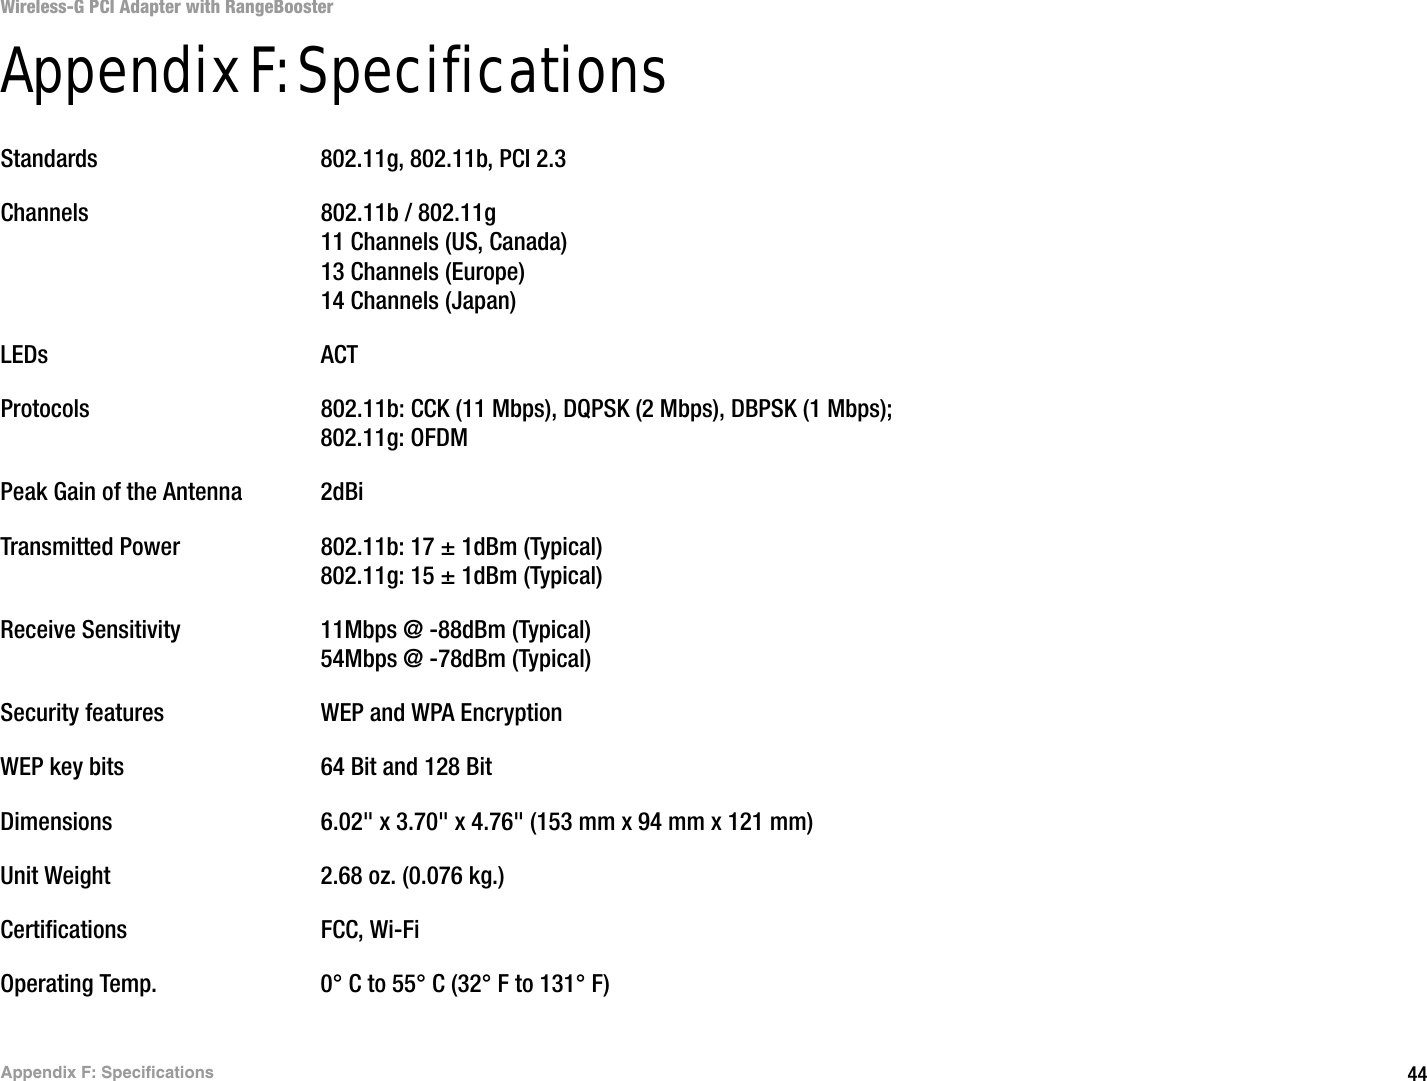 44Appendix F: SpecificationsWireless-G PCI Adapter with RangeBoosterAppendix F: SpecificationsStandards 802.11g, 802.11b, PCI 2.3Channels 802.11b / 802.11g11 Channels (US, Canada)13 Channels (Europe)14 Channels (Japan)LEDs ACTProtocols 802.11b: CCK (11 Mbps), DQPSK (2 Mbps), DBPSK (1 Mbps); 802.11g: OFDMPeak Gain of the Antenna 2dBiTransmitted Power 802.11b: 17 ± 1dBm (Typical)802.11g: 15 ± 1dBm (Typical)Receive Sensitivity 11Mbps @ -88dBm (Typical)54Mbps @ -78dBm (Typical)Security features WEP and WPA EncryptionWEP key bits 64 Bit and 128 BitDimensions  6.02&quot; x 3.70&quot; x 4.76&quot; (153 mm x 94 mm x 121 mm)Unit Weight 2.68 oz. (0.076 kg.)Certifications FCC, Wi-FiOperating Temp. 0° C to 55° C (32° F to 131° F)